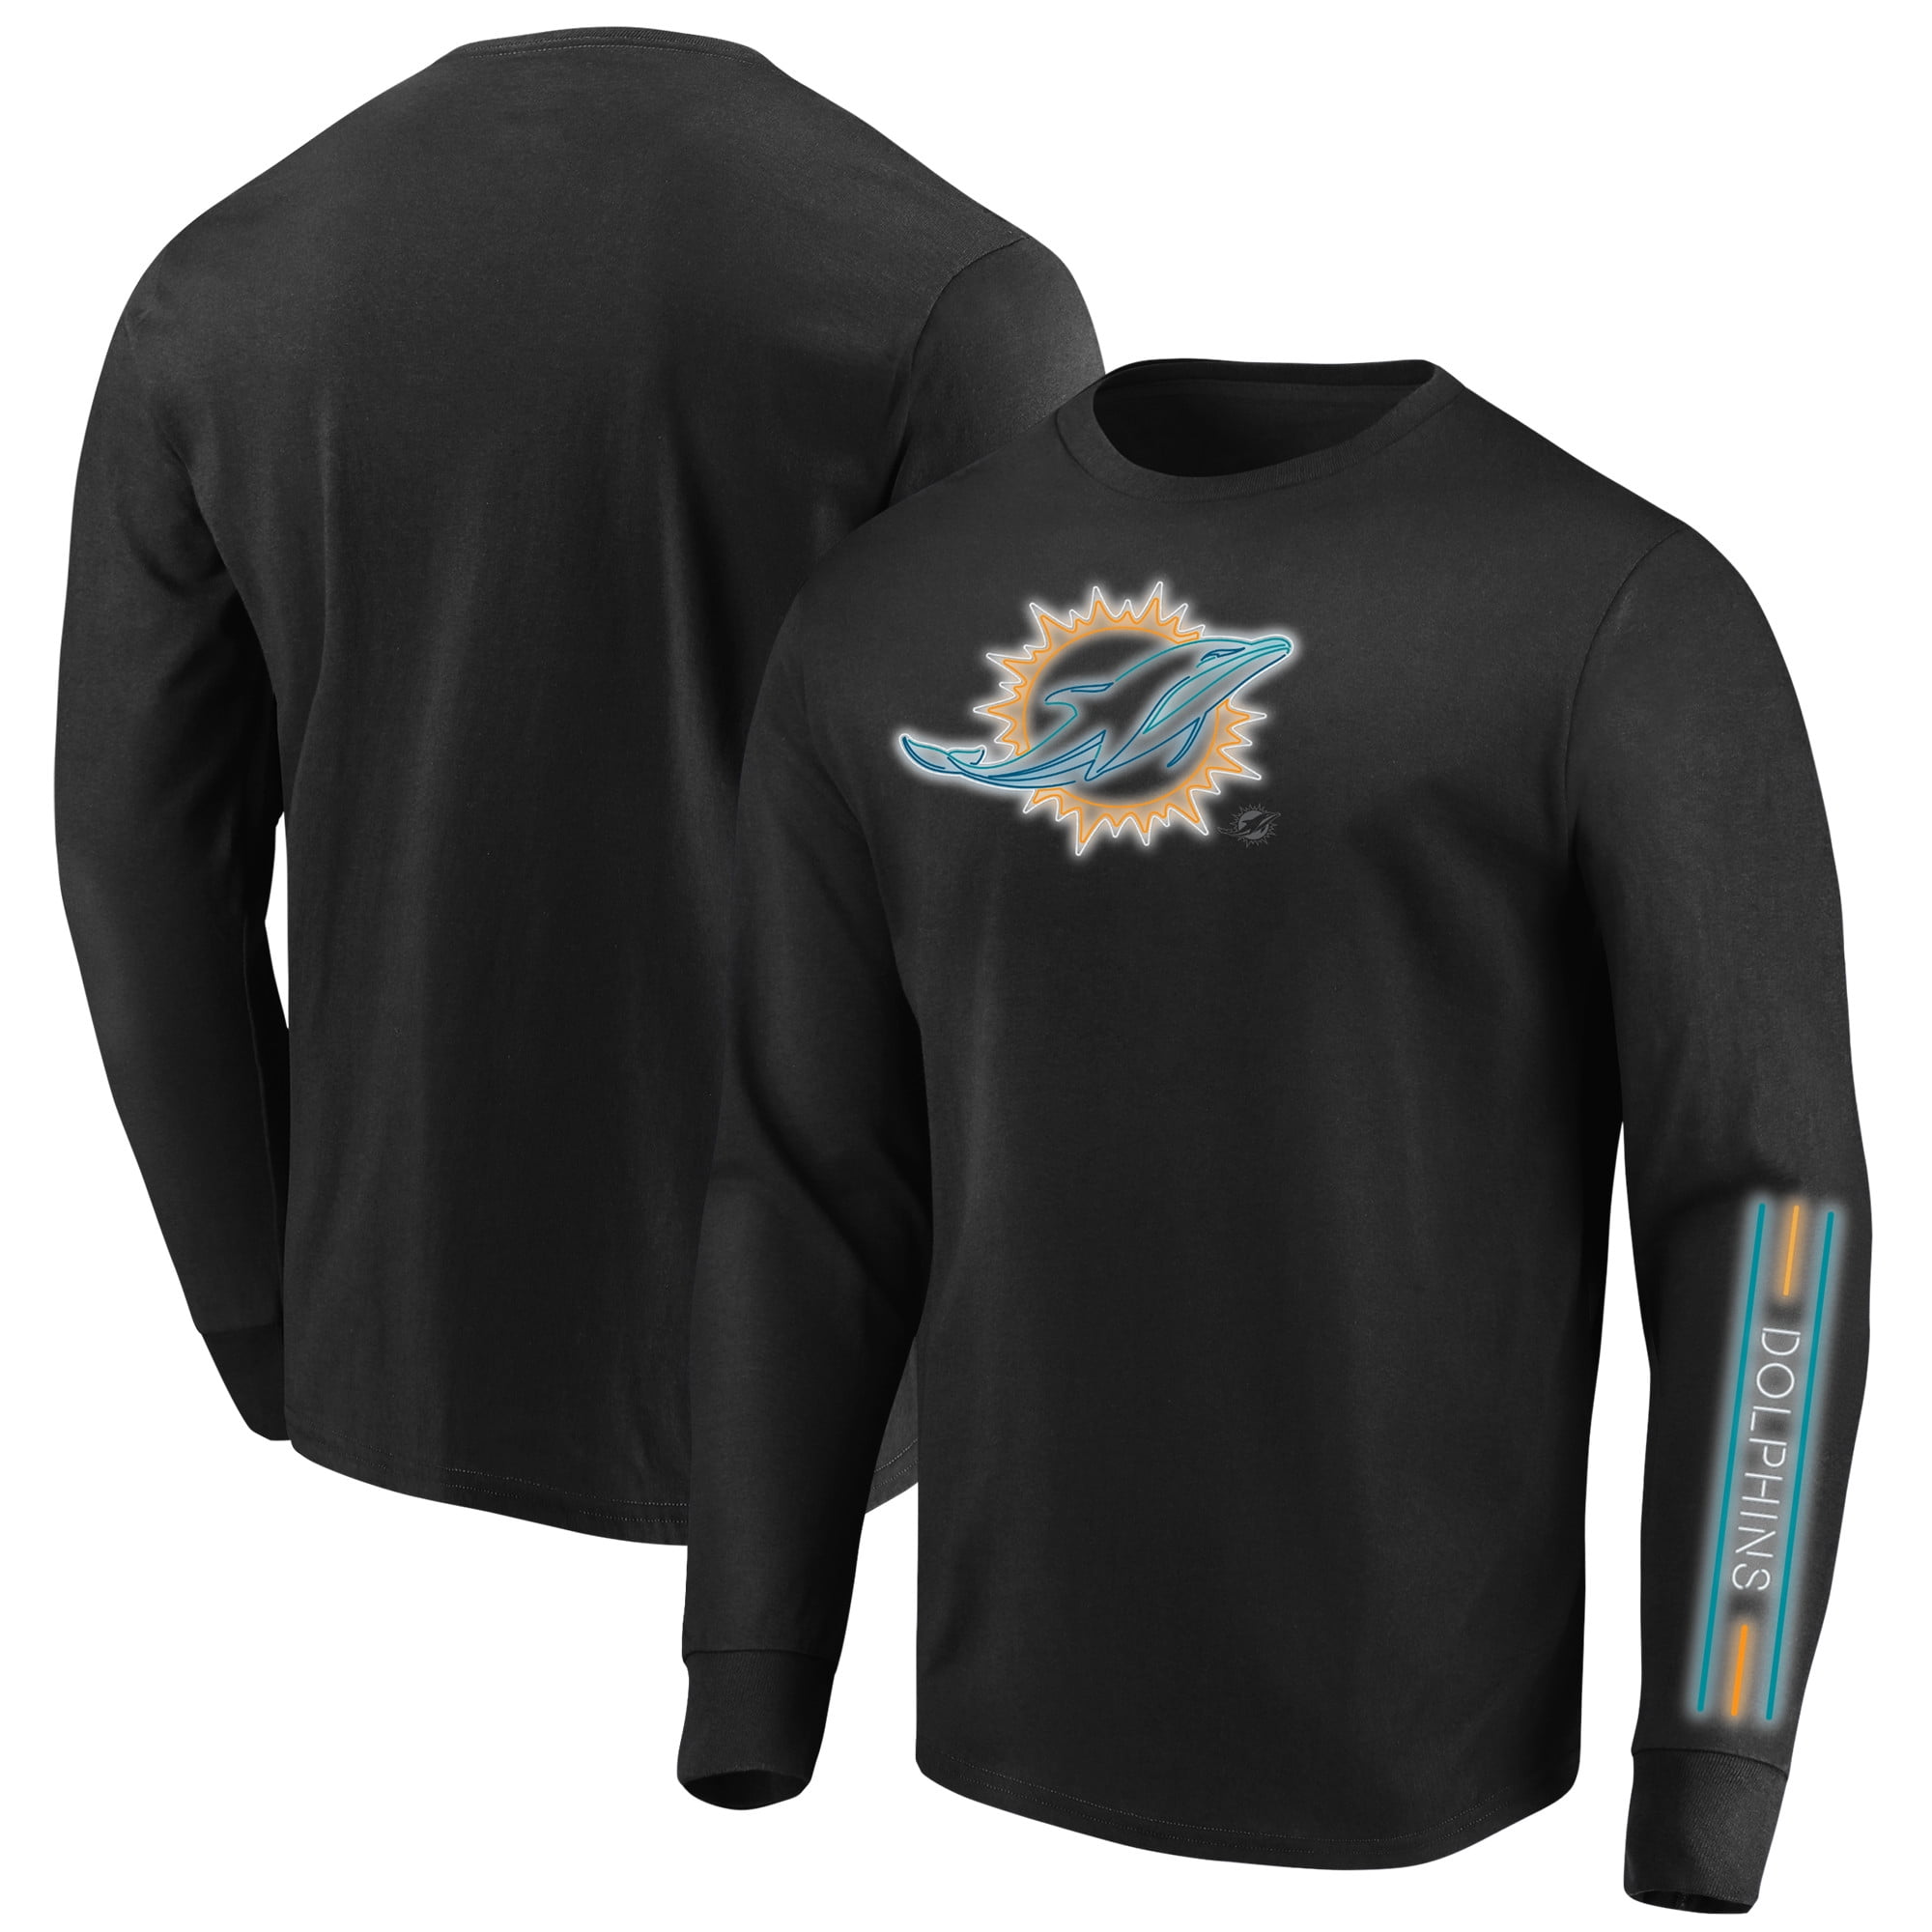 big and tall miami dolphins shirts